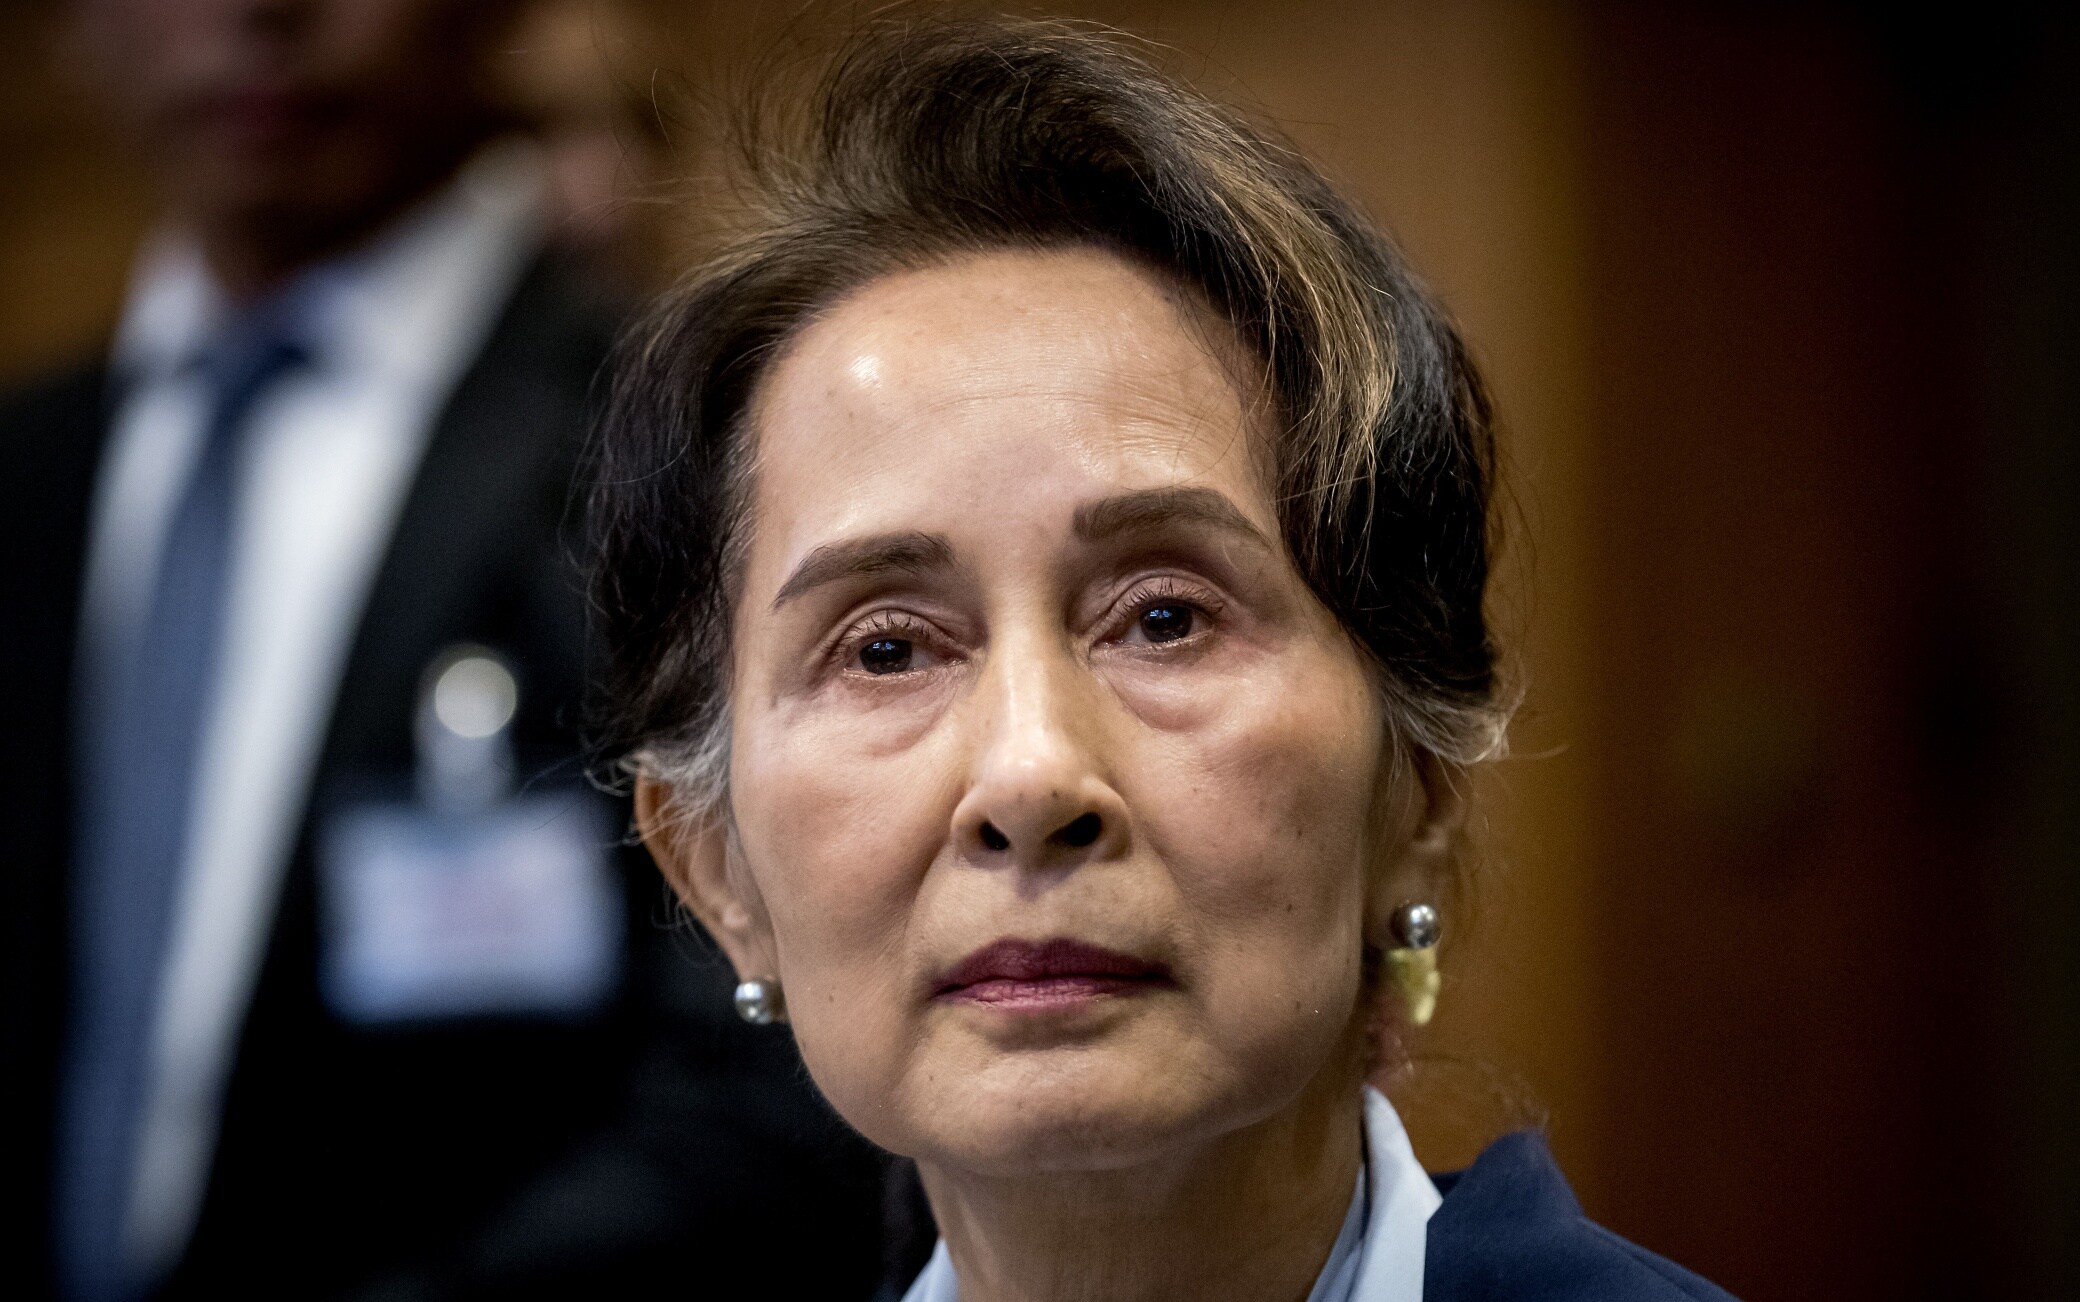 Aung San Suu Kyi, who is the leader arrested and sentenced by the military in Myanmar